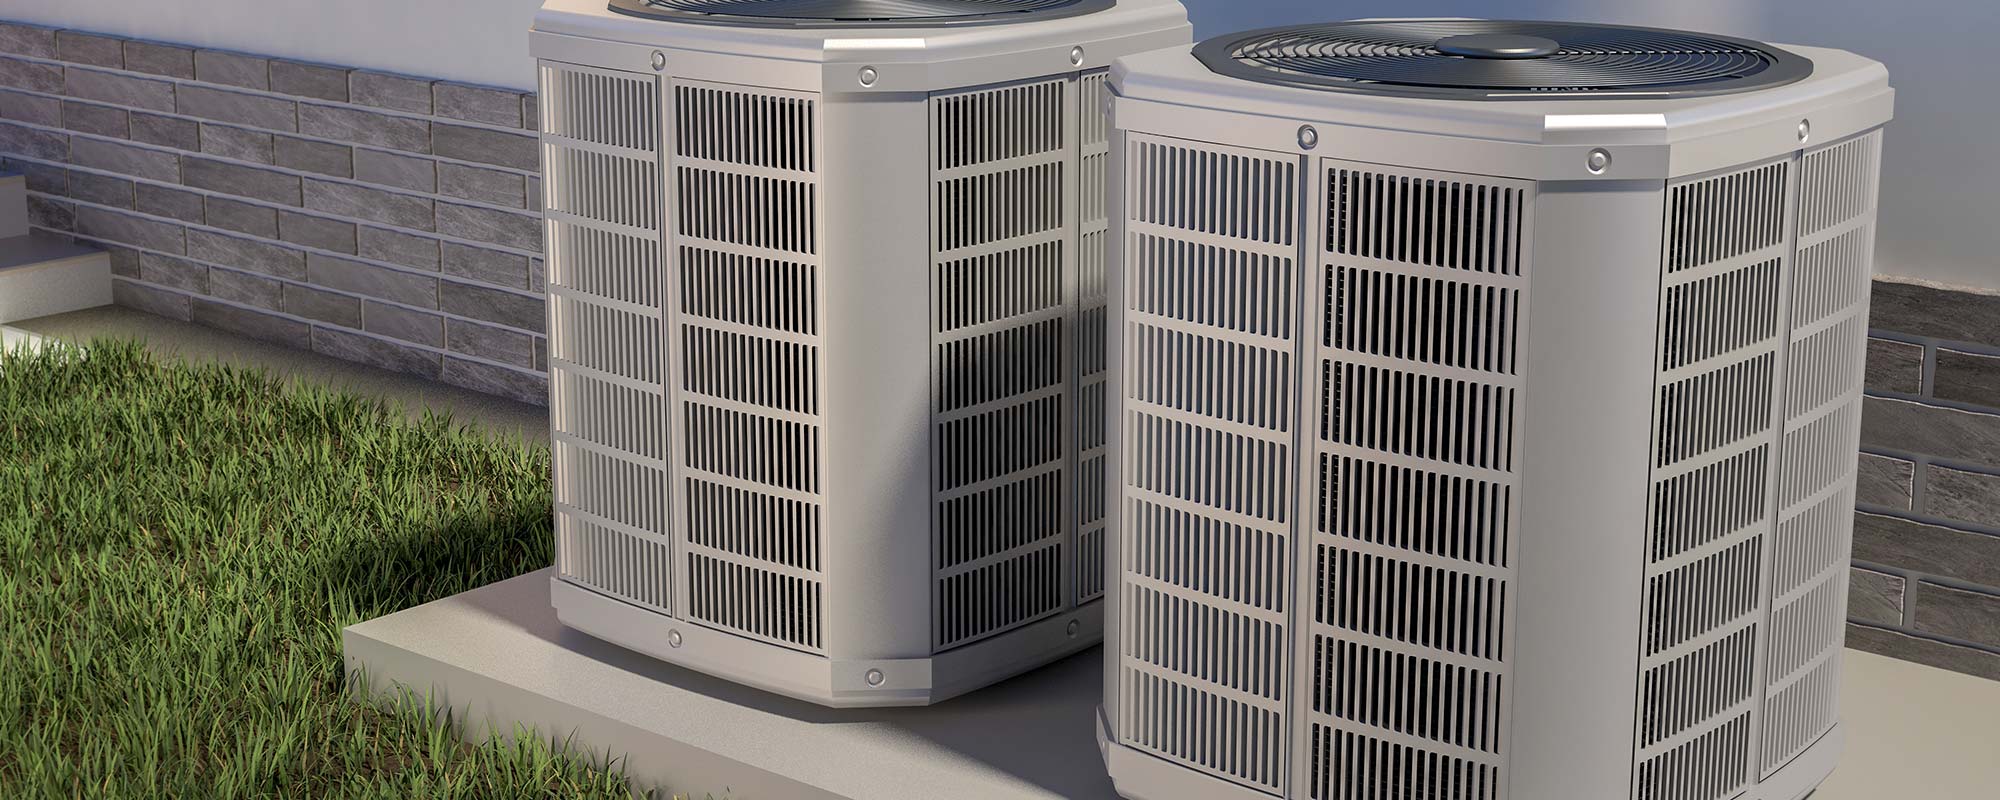 A Homeowners Guide to Choosing the Right Heat Pump for Your Home